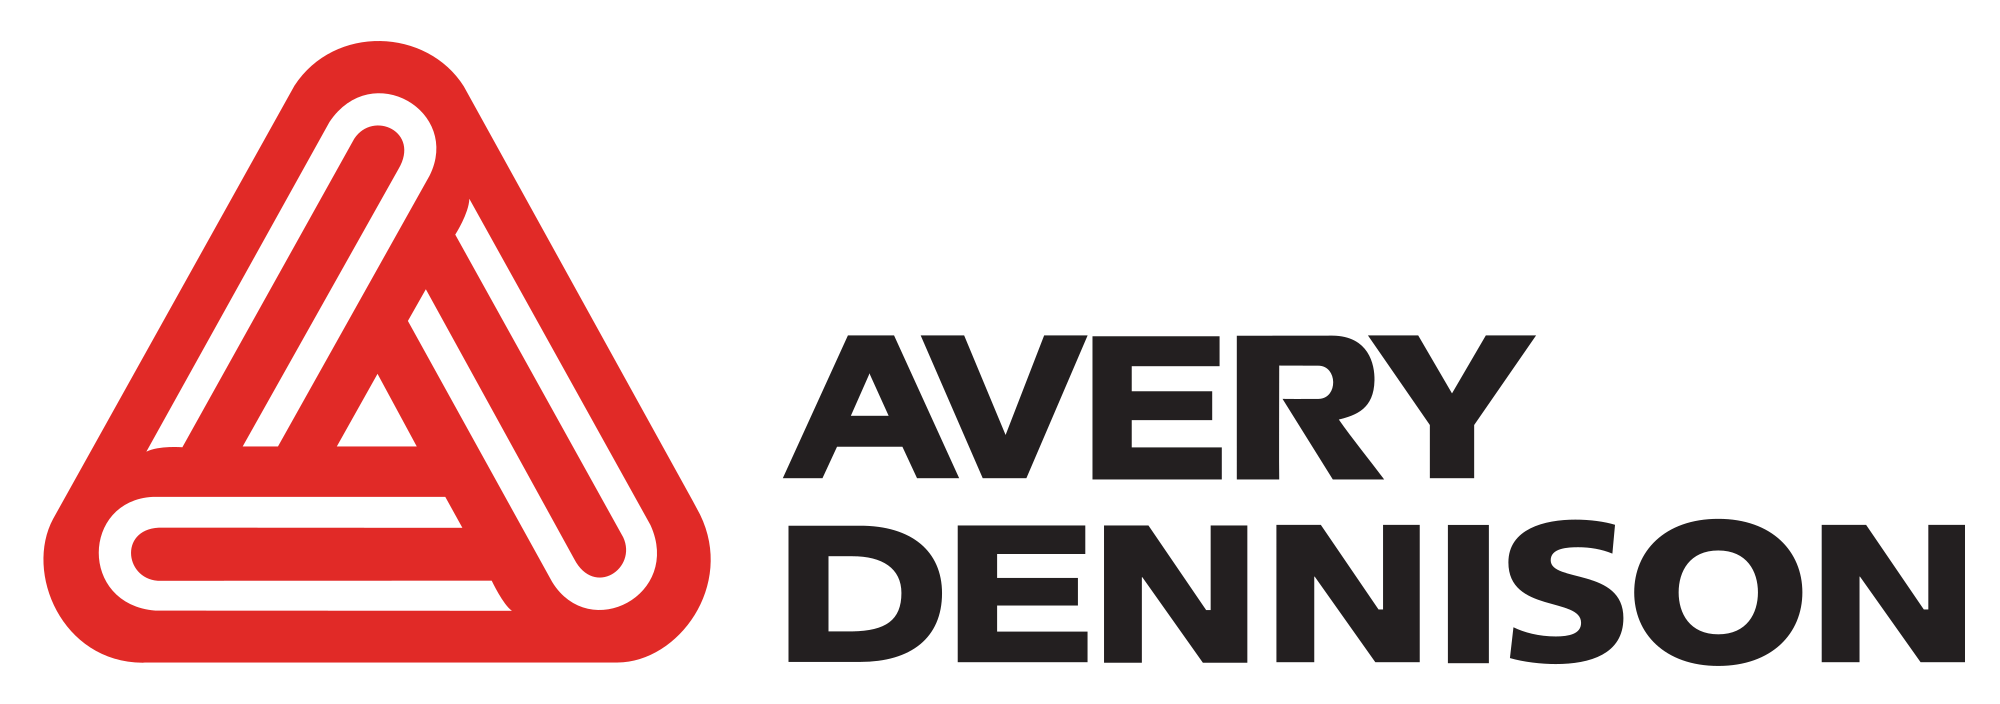 Open  , Avery Dennison PNG - Free PNG